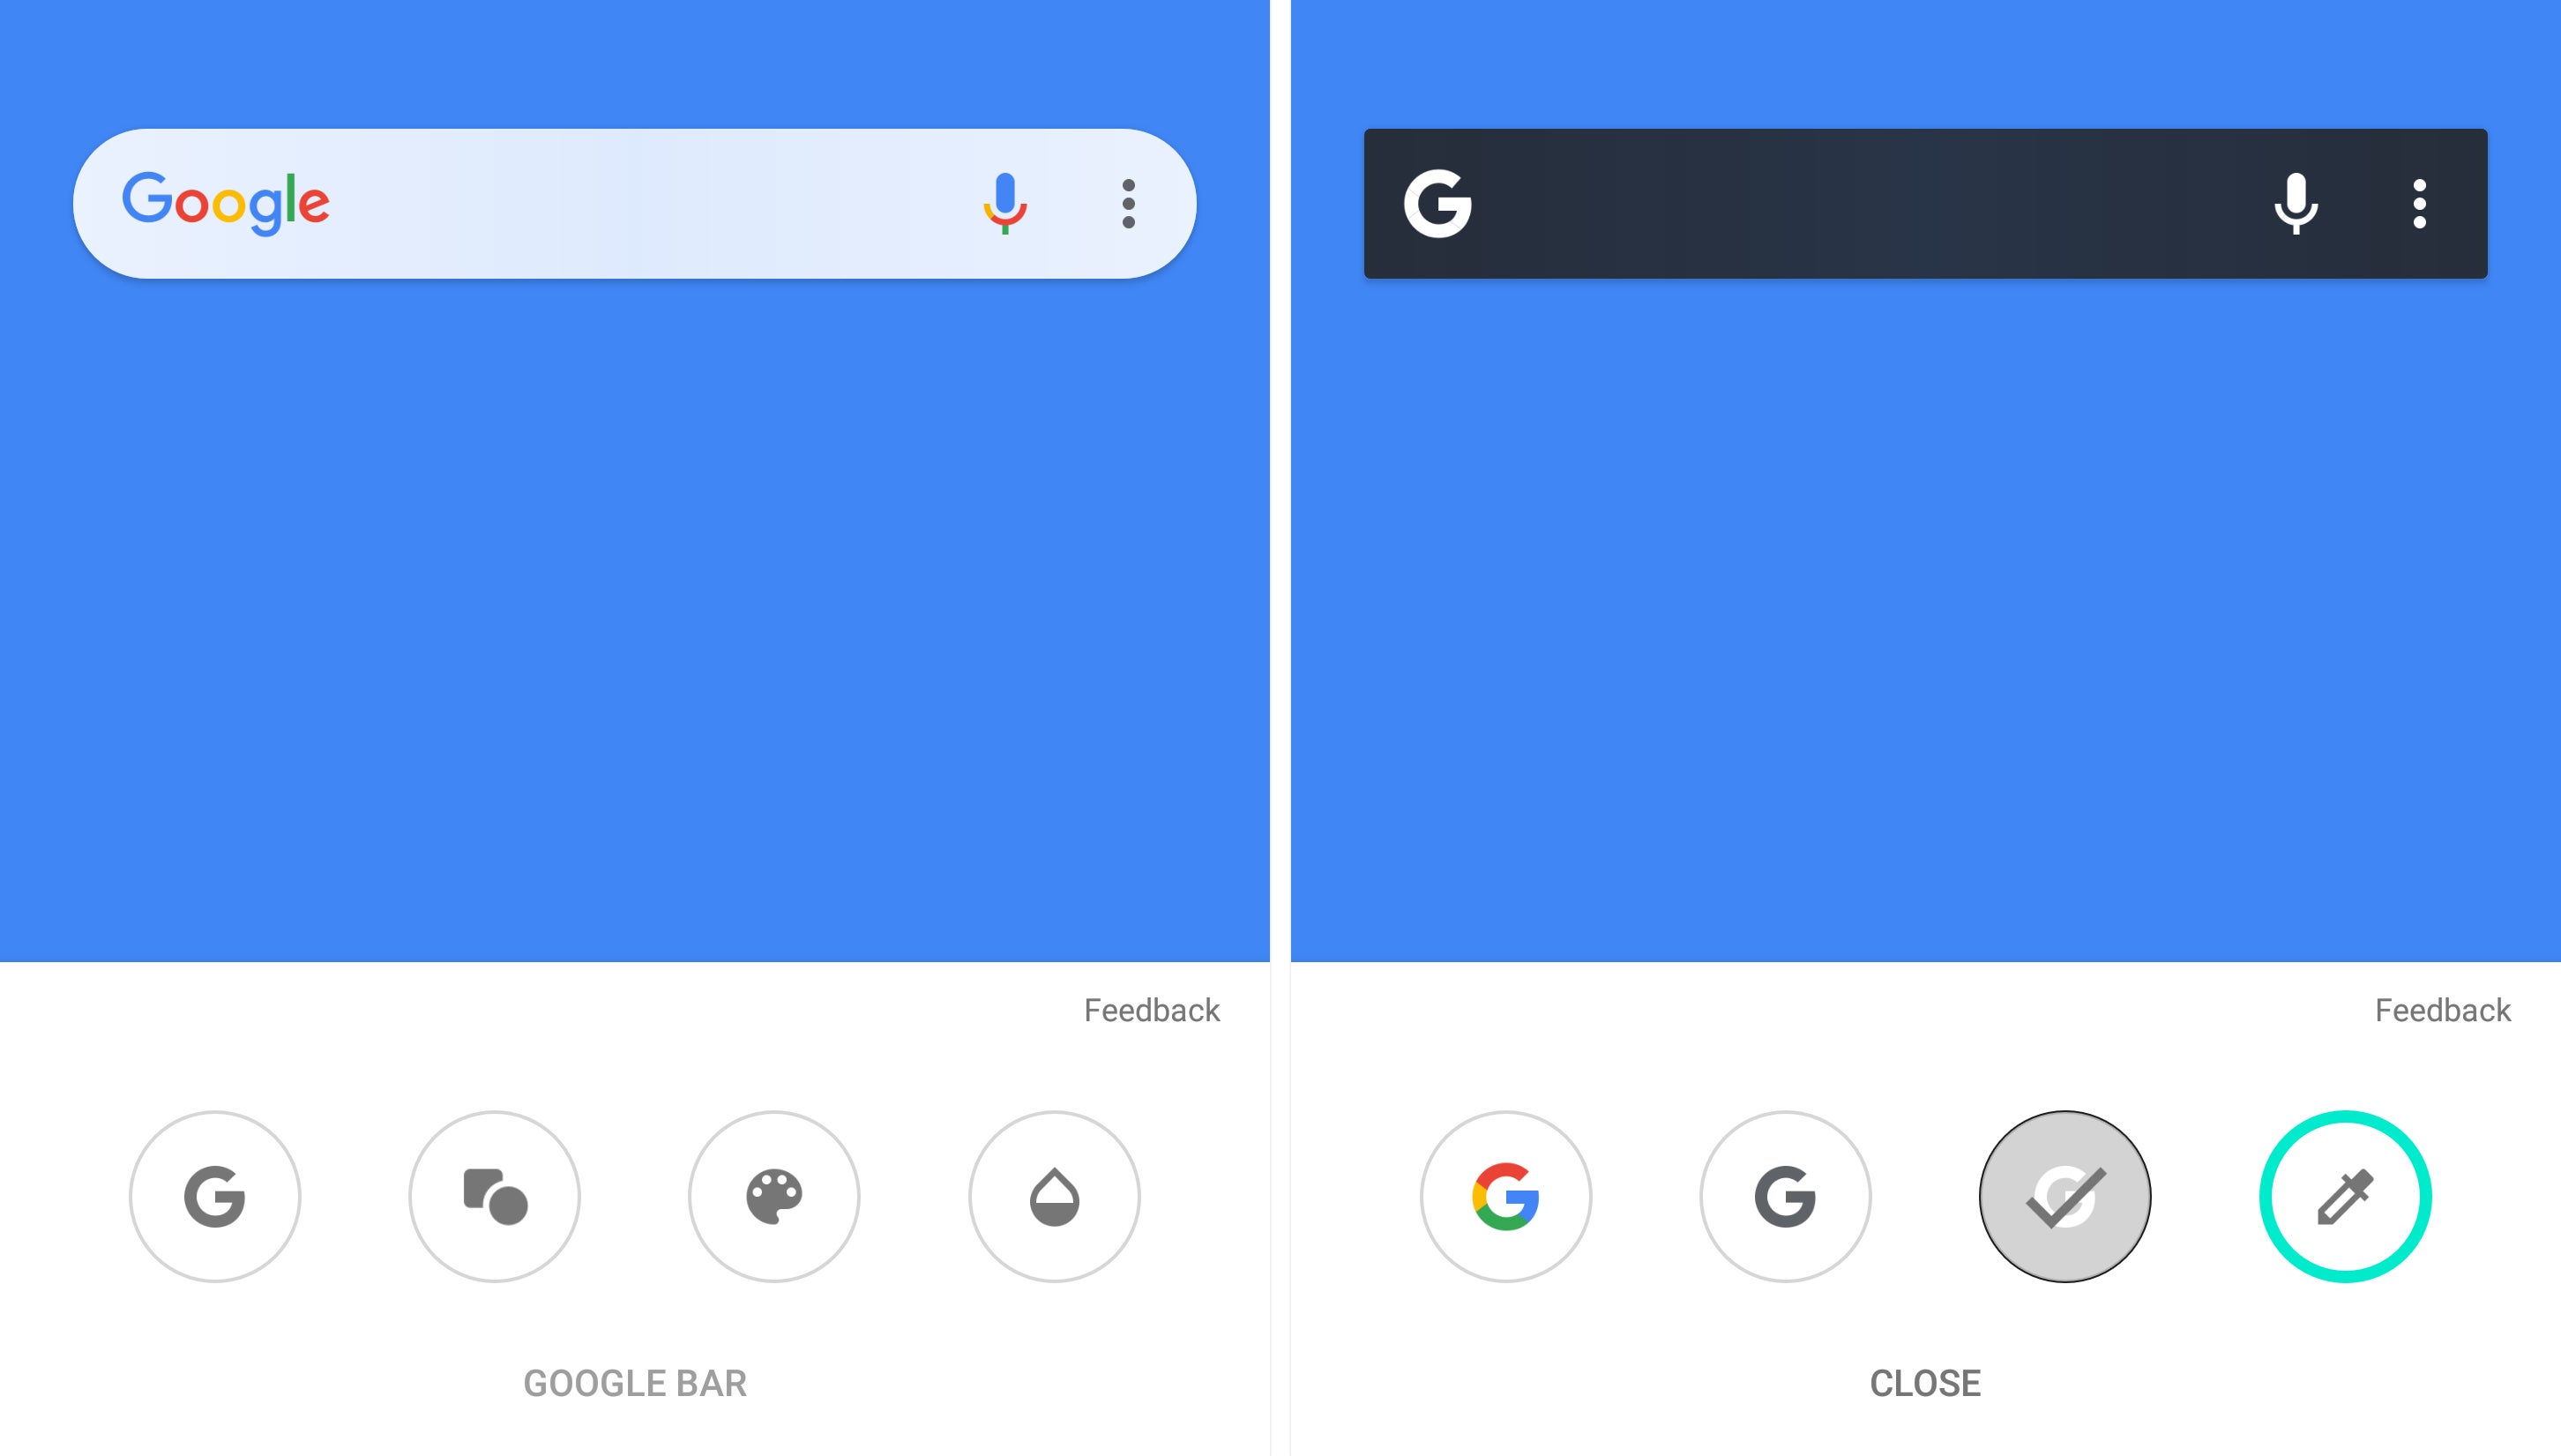 The following customization settings are available for the Google search bar widget (from left to right) - Logo type, shape, color, transparency - Google App is getting a customizable search bar widget in the latest update